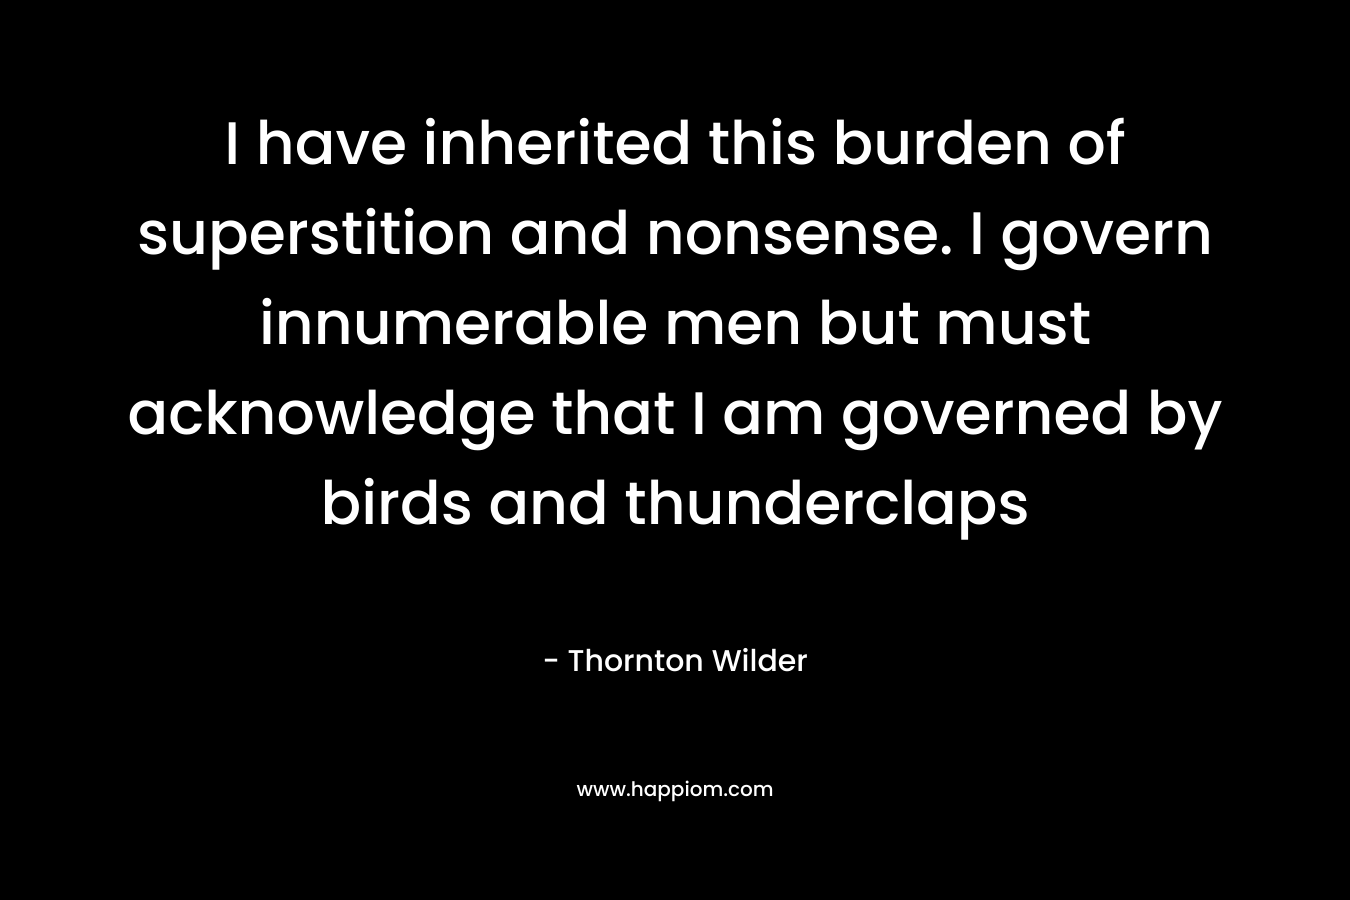 I have inherited this burden of superstition and nonsense. I govern innumerable men but must acknowledge that I am governed by birds and thunderclaps – Thornton Wilder